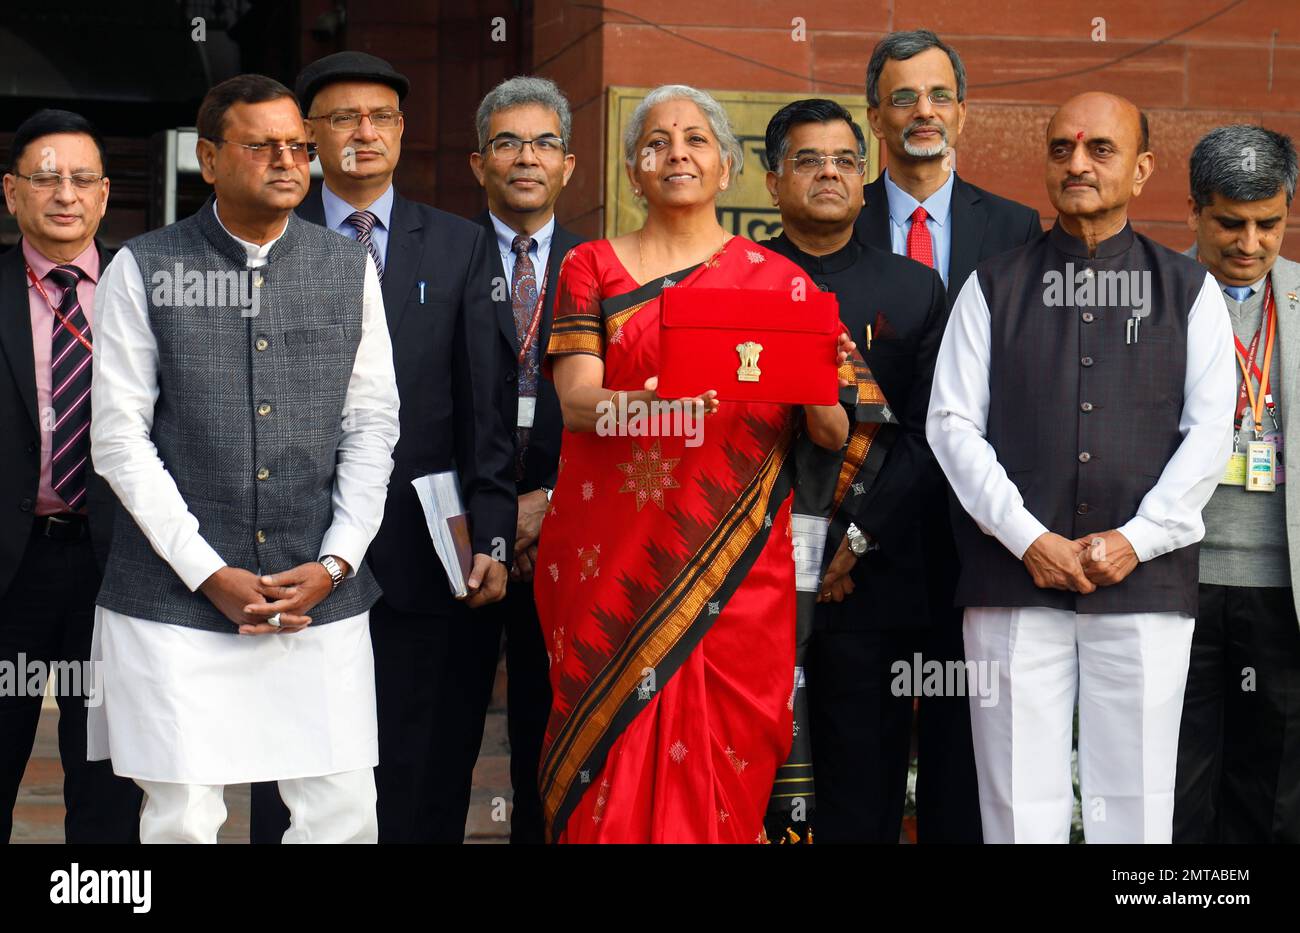 New Delhi, India. 01st Feb, 2023. Union Minister for Finance, Nirmala Sitharaman, Centre, Union Minister of Sate Bhagwat Kishanrao Karad, Right, and Pankaj Chaudhary, Left with other officials pose for photographs before she leaves her office (Finance Ministry), for the President's House before present the annual Budget for the year 2023-24 in the Parliament in New Delhi. Nirmala Sitharaman will be presenting her fifth union Budget. Credit: SOPA Images Limited/Alamy Live News Stock Photo